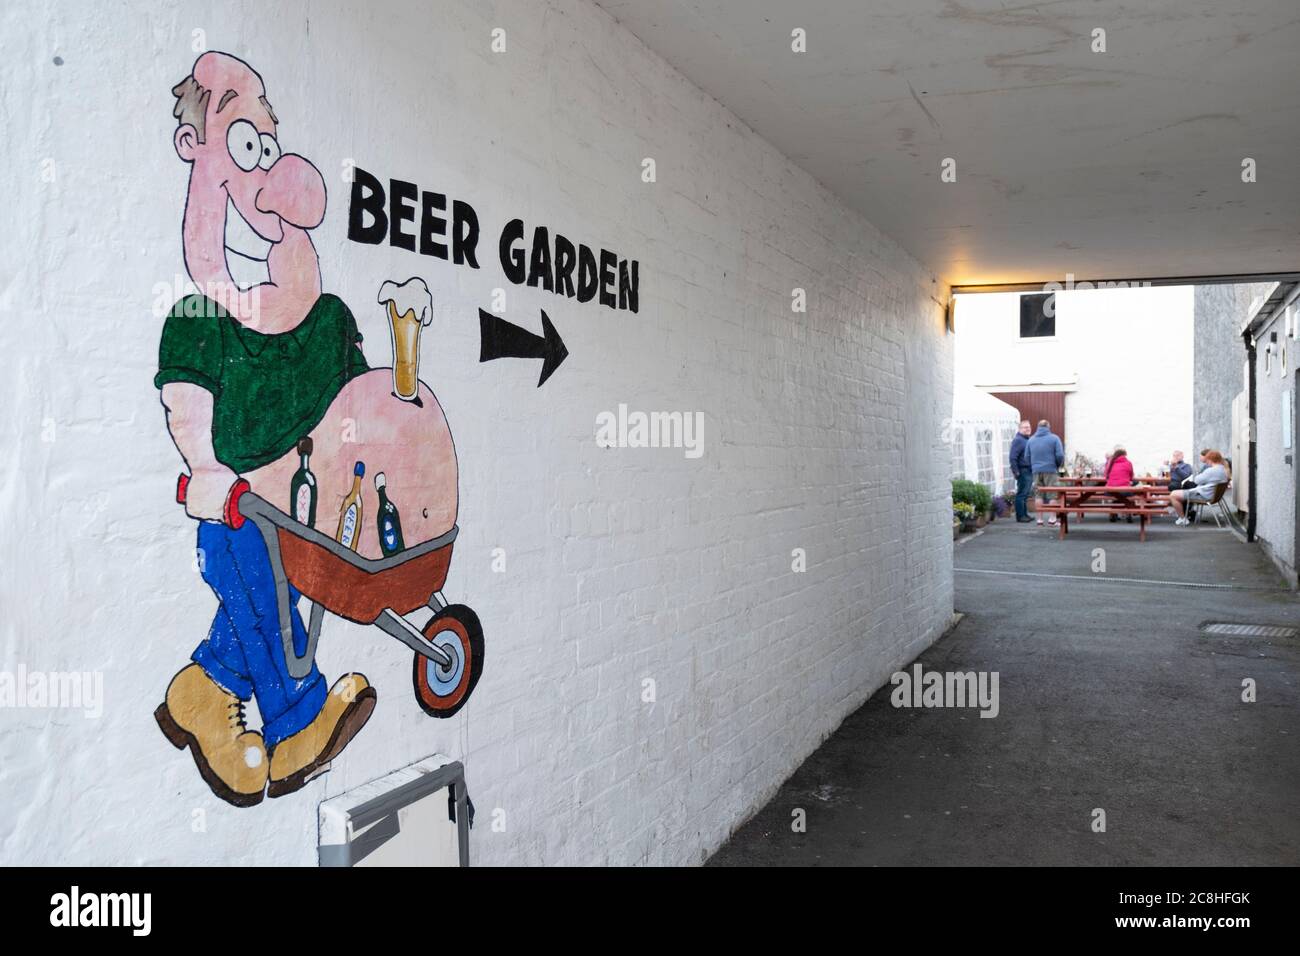 Cartoon sign pointing the way to a pub beer garden, Dalbeattie, Dumfries and Galloway, Scotland. Stock Photo